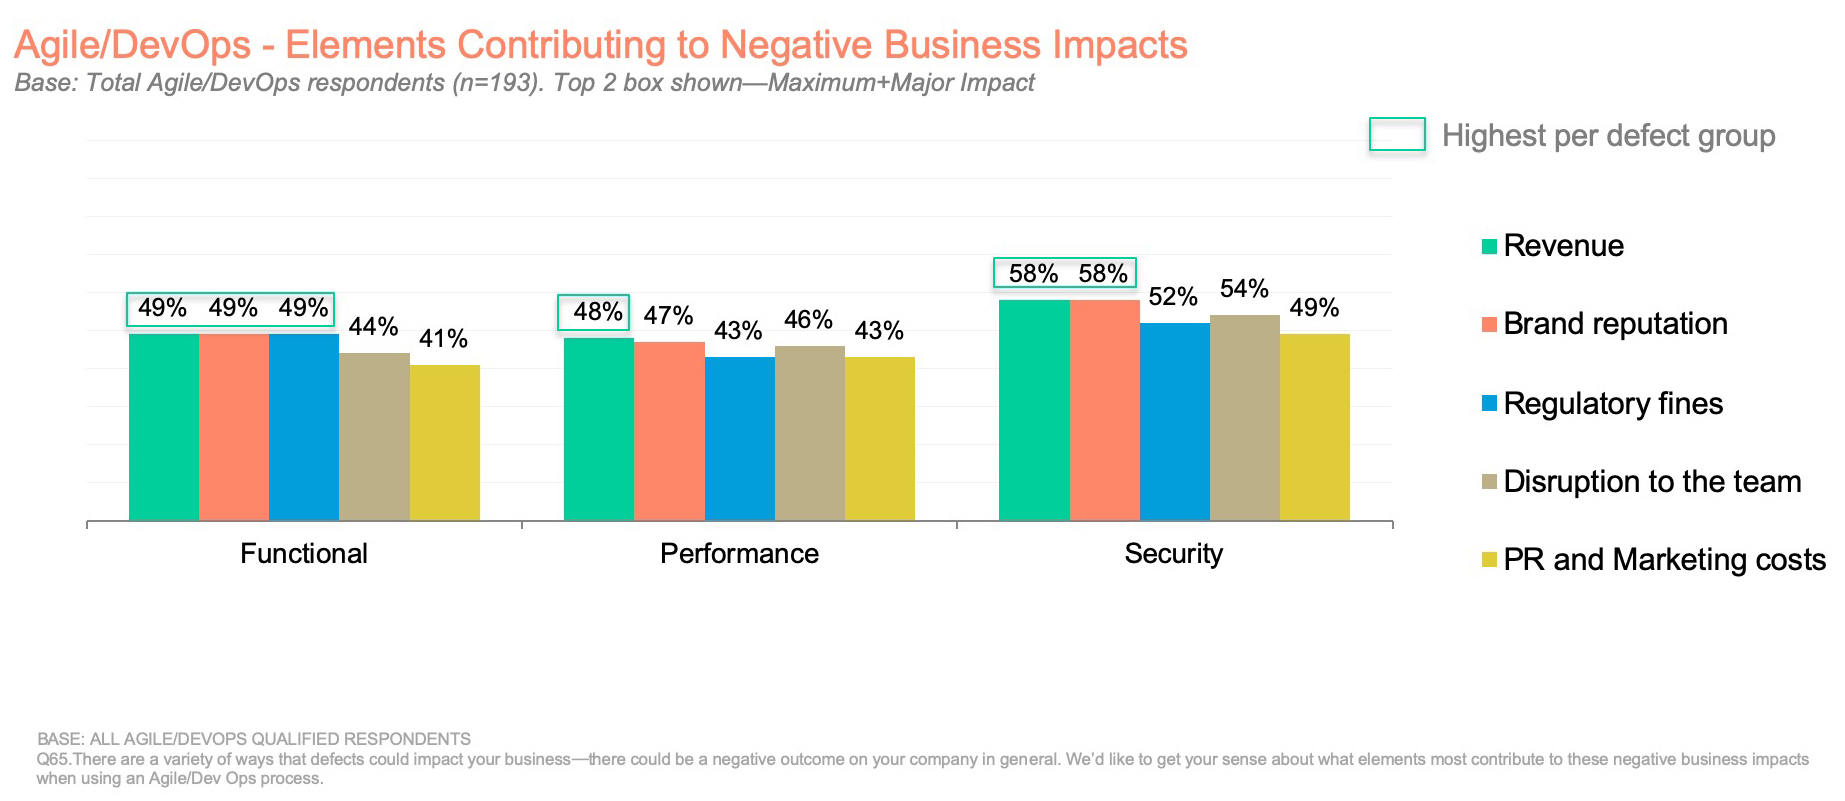 Agile/DevOps- Elements Contributing to Negative Business Impacts